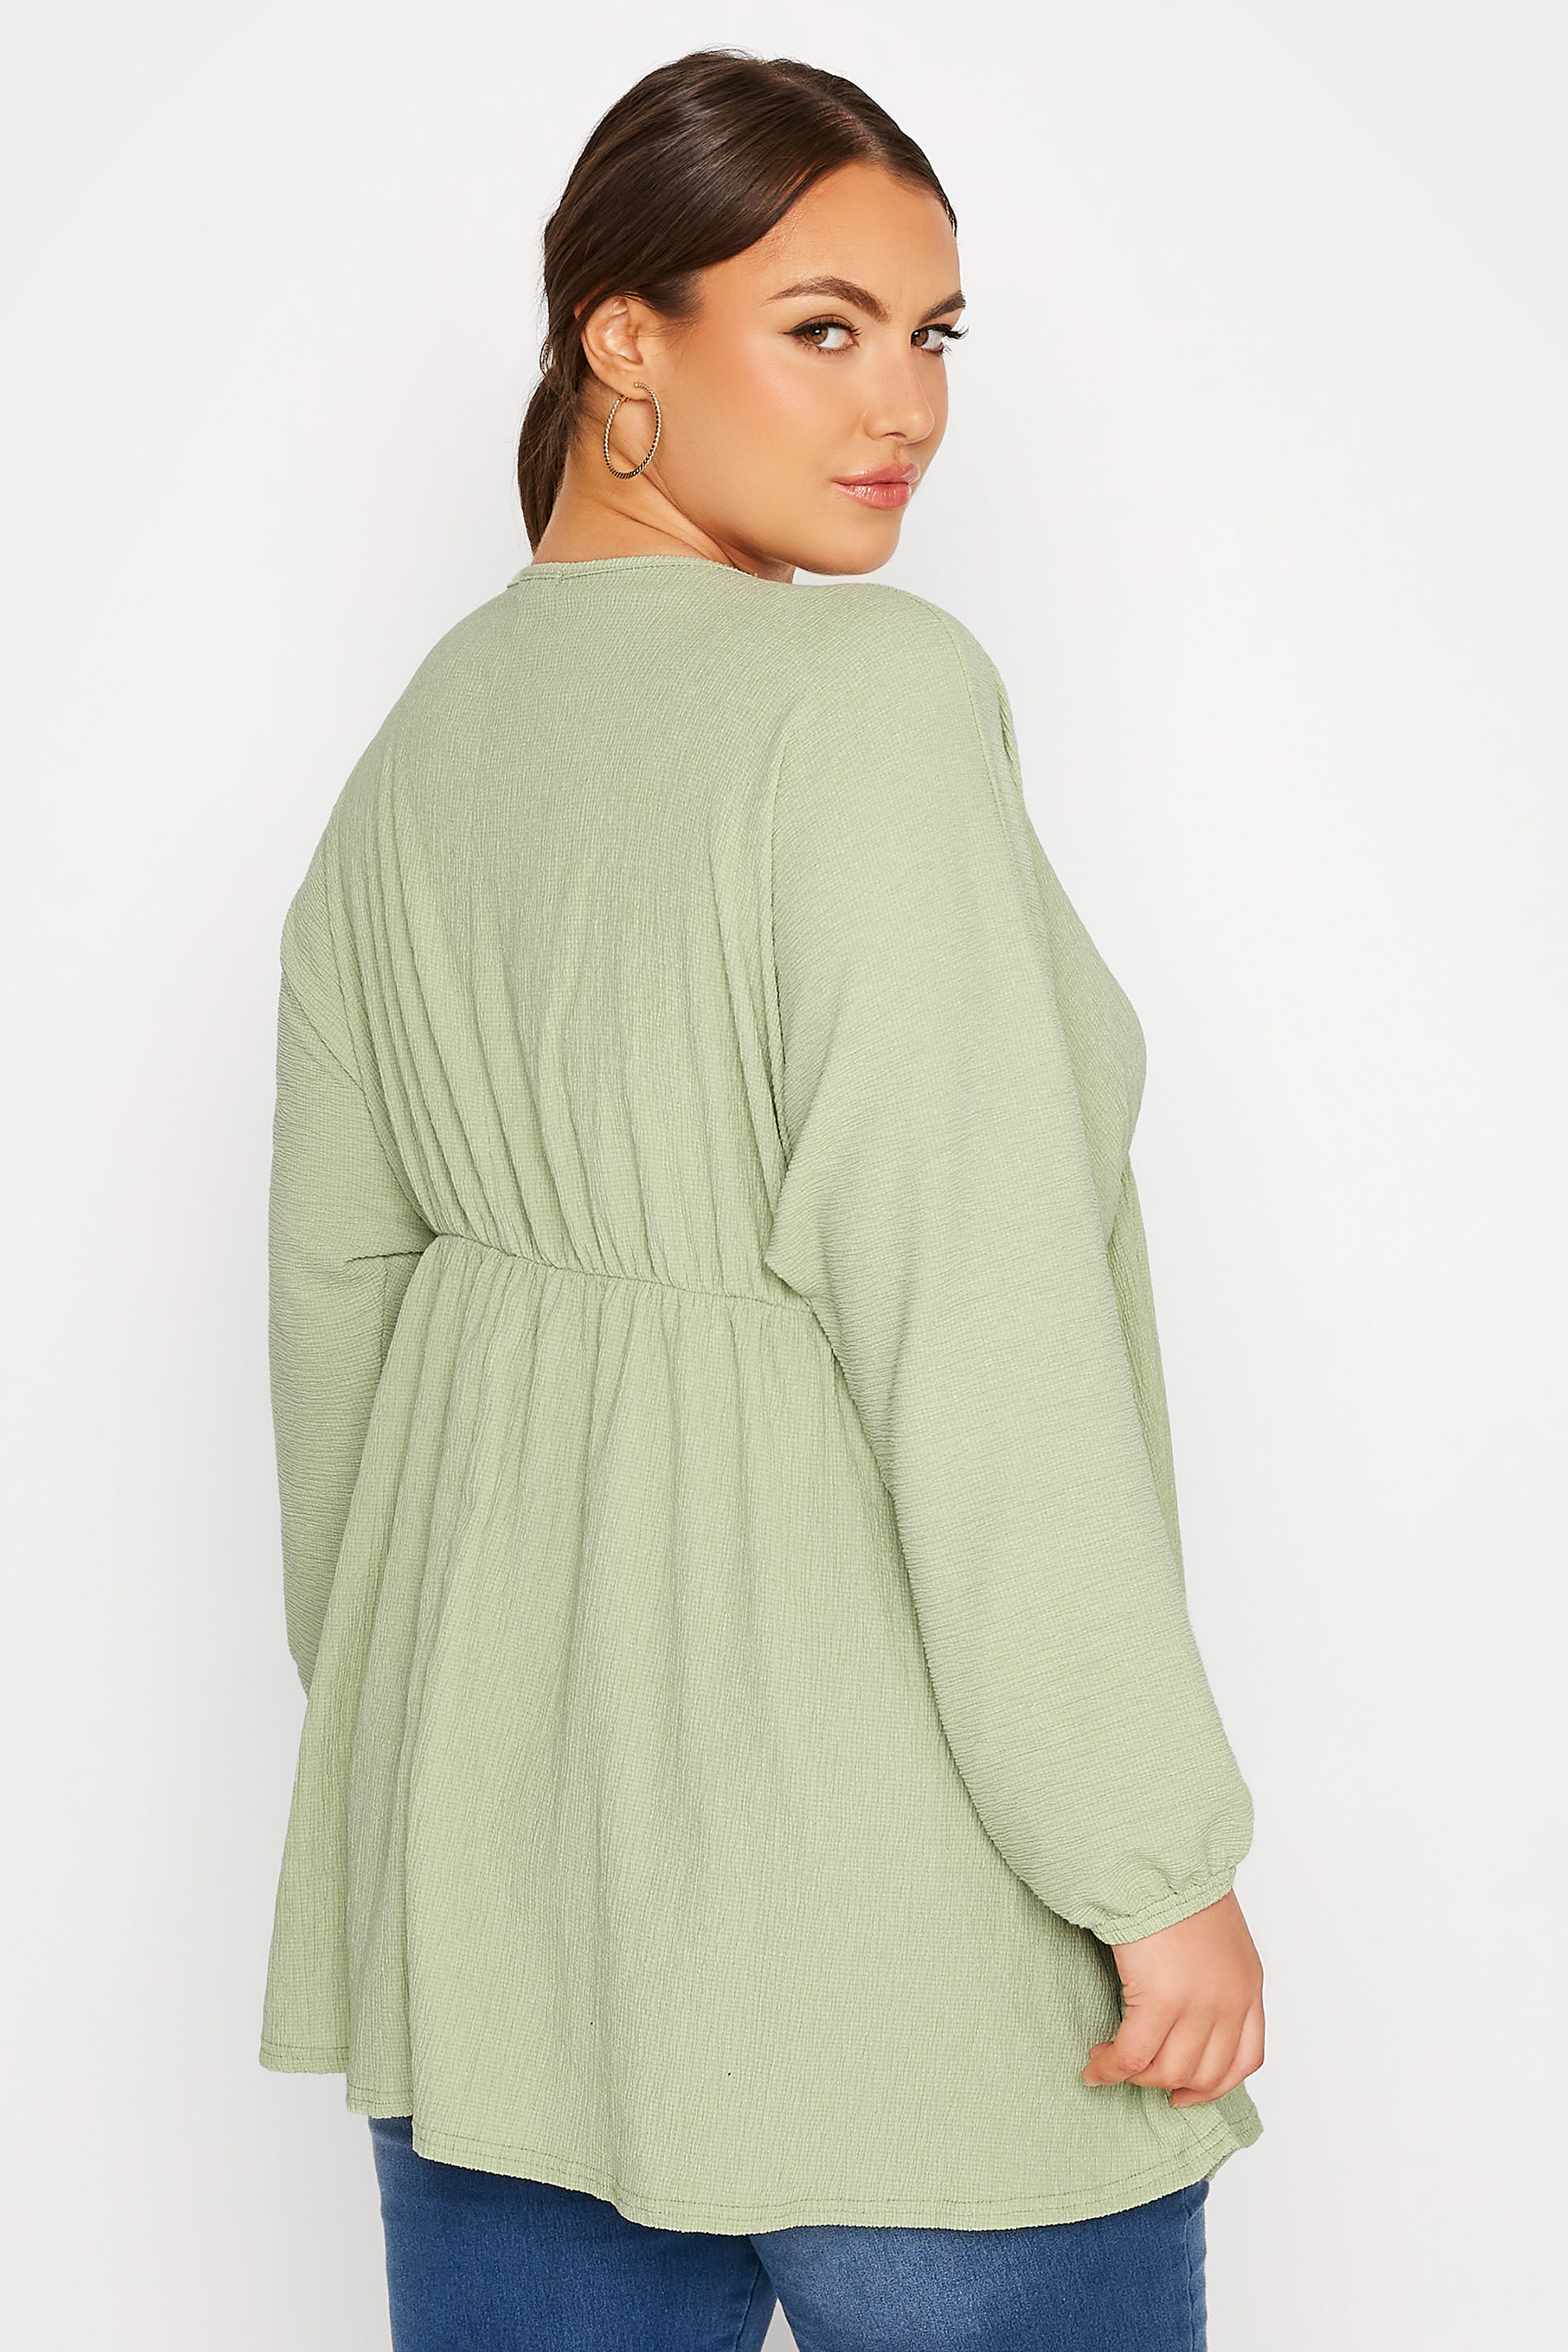 LIMITED COLLECTION Plus Size Sage Green Crinkle Lace Up Peplum Blouse | Yours Clothing 3